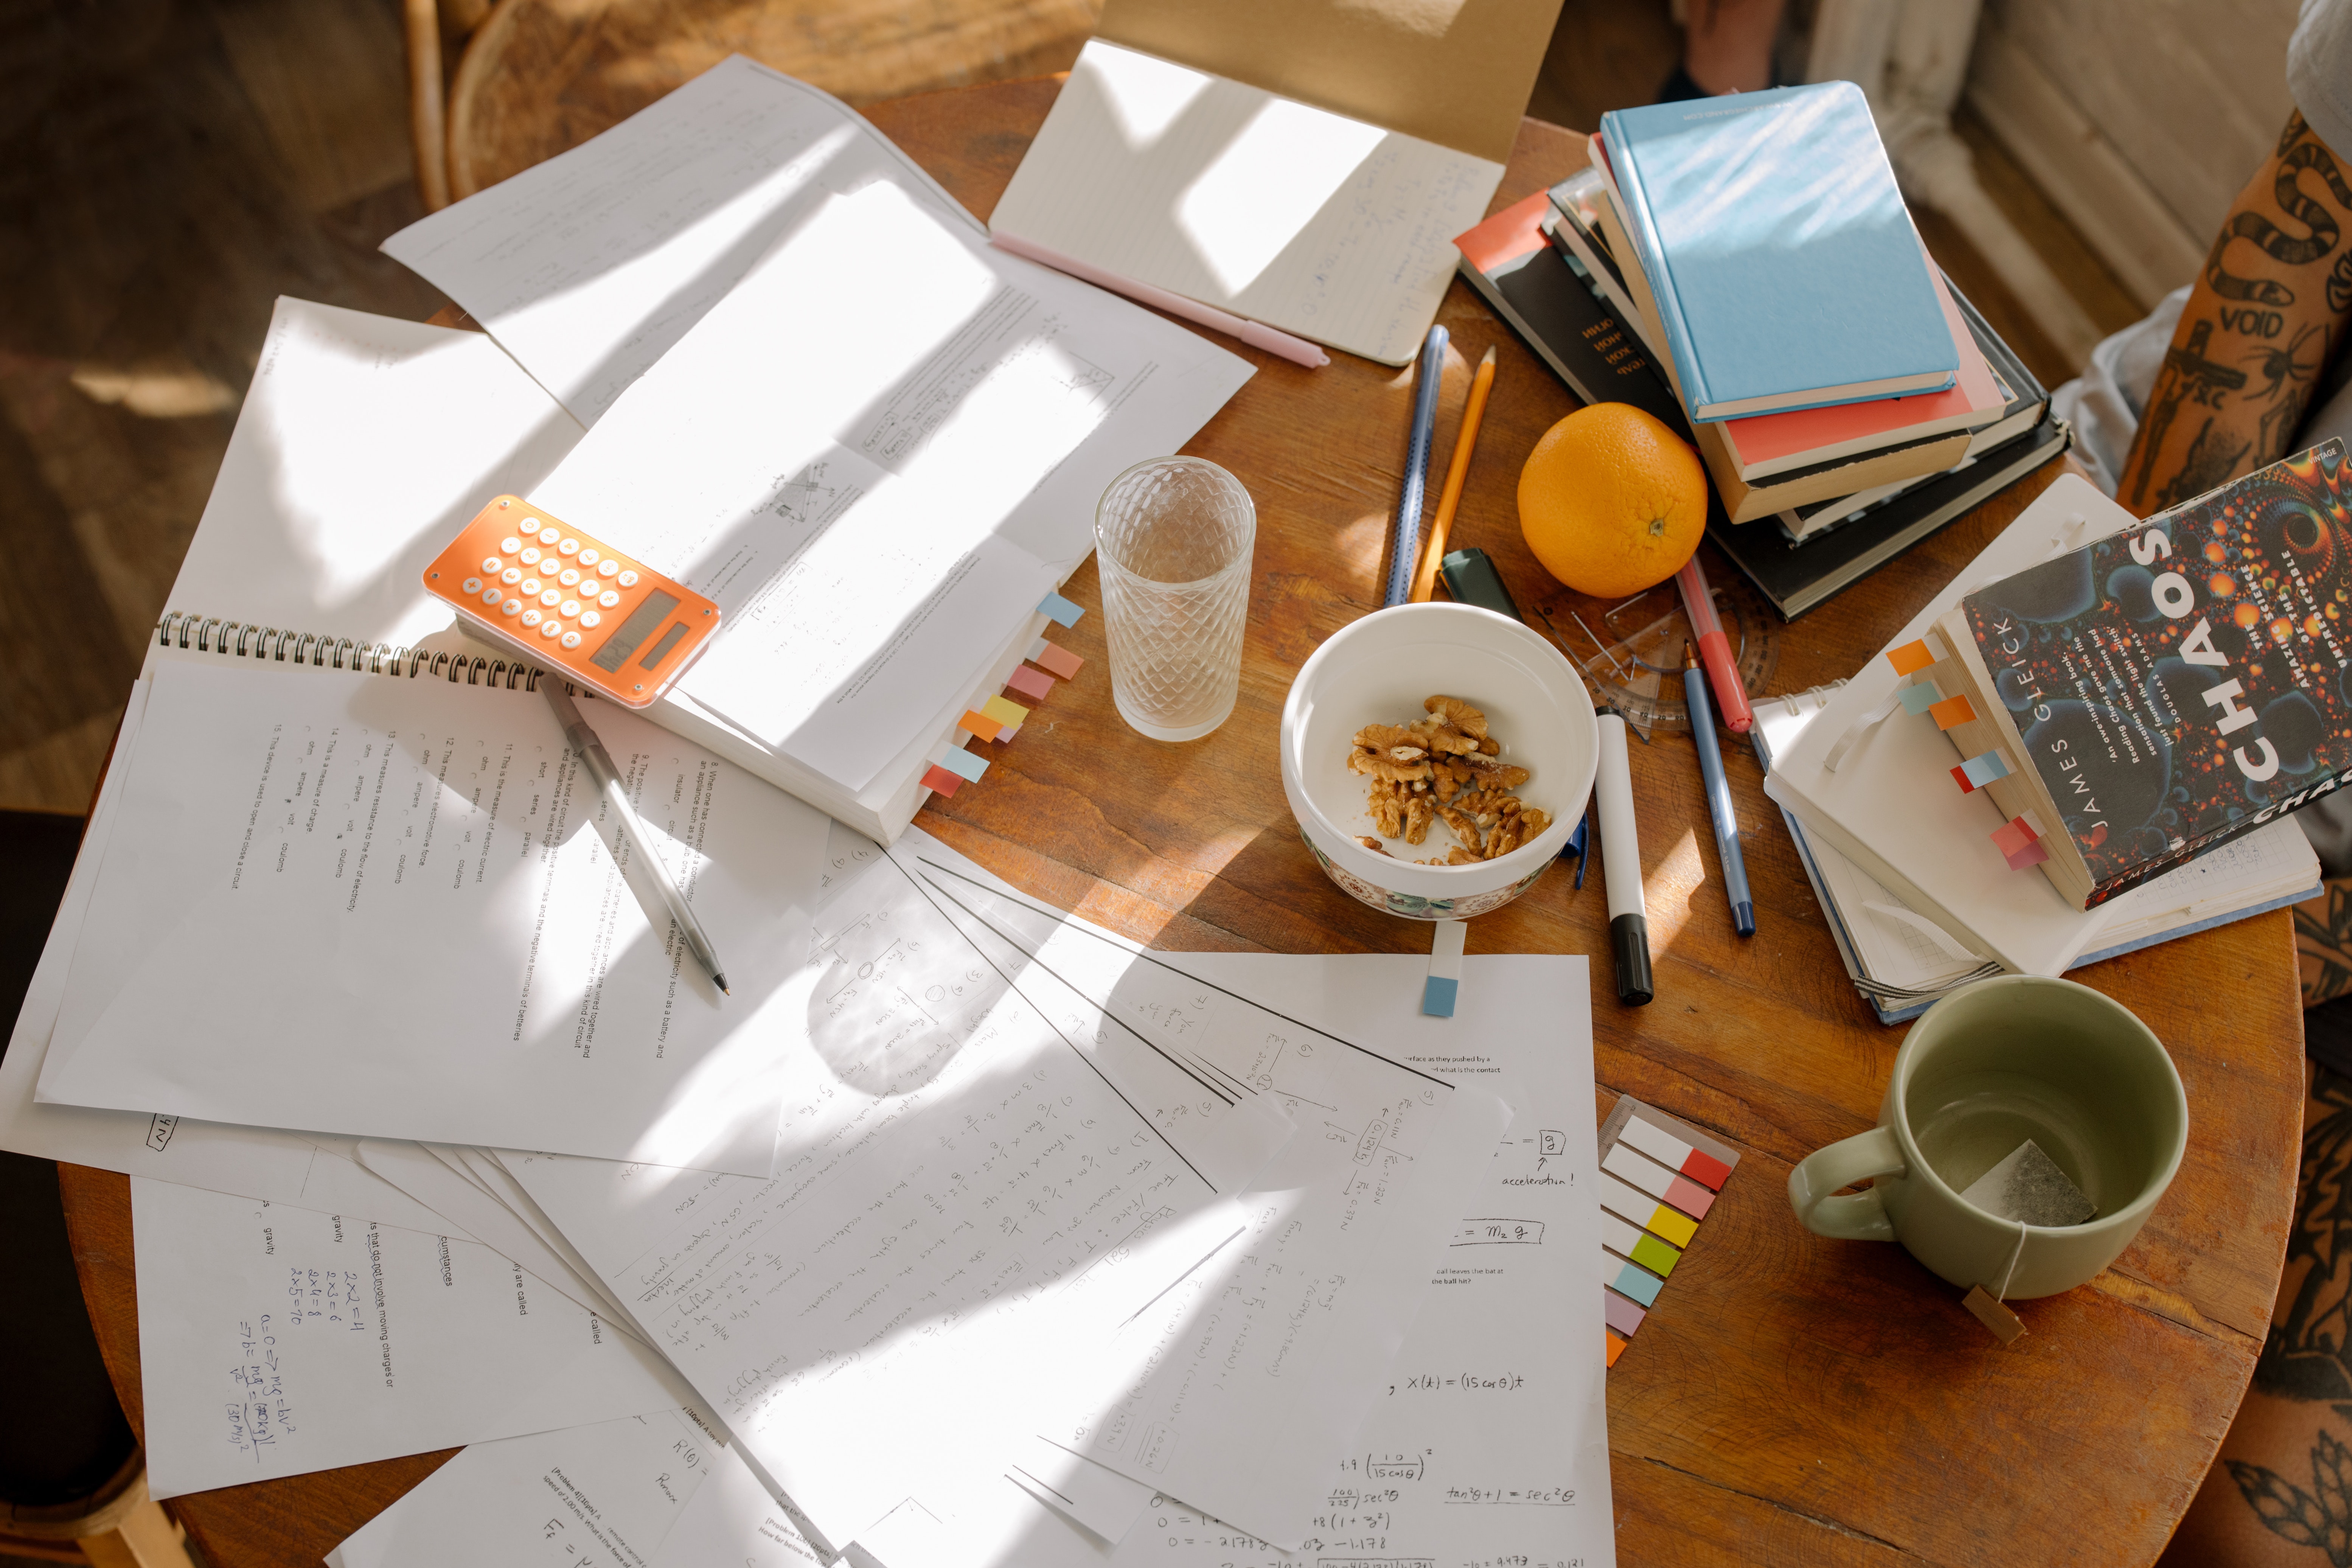 This image is taken from the top and has a round table with papers, books, pens, pencils, a calculator, one empty green cup, an empty glass, one orange, and a bowl of some leftover walnuts.